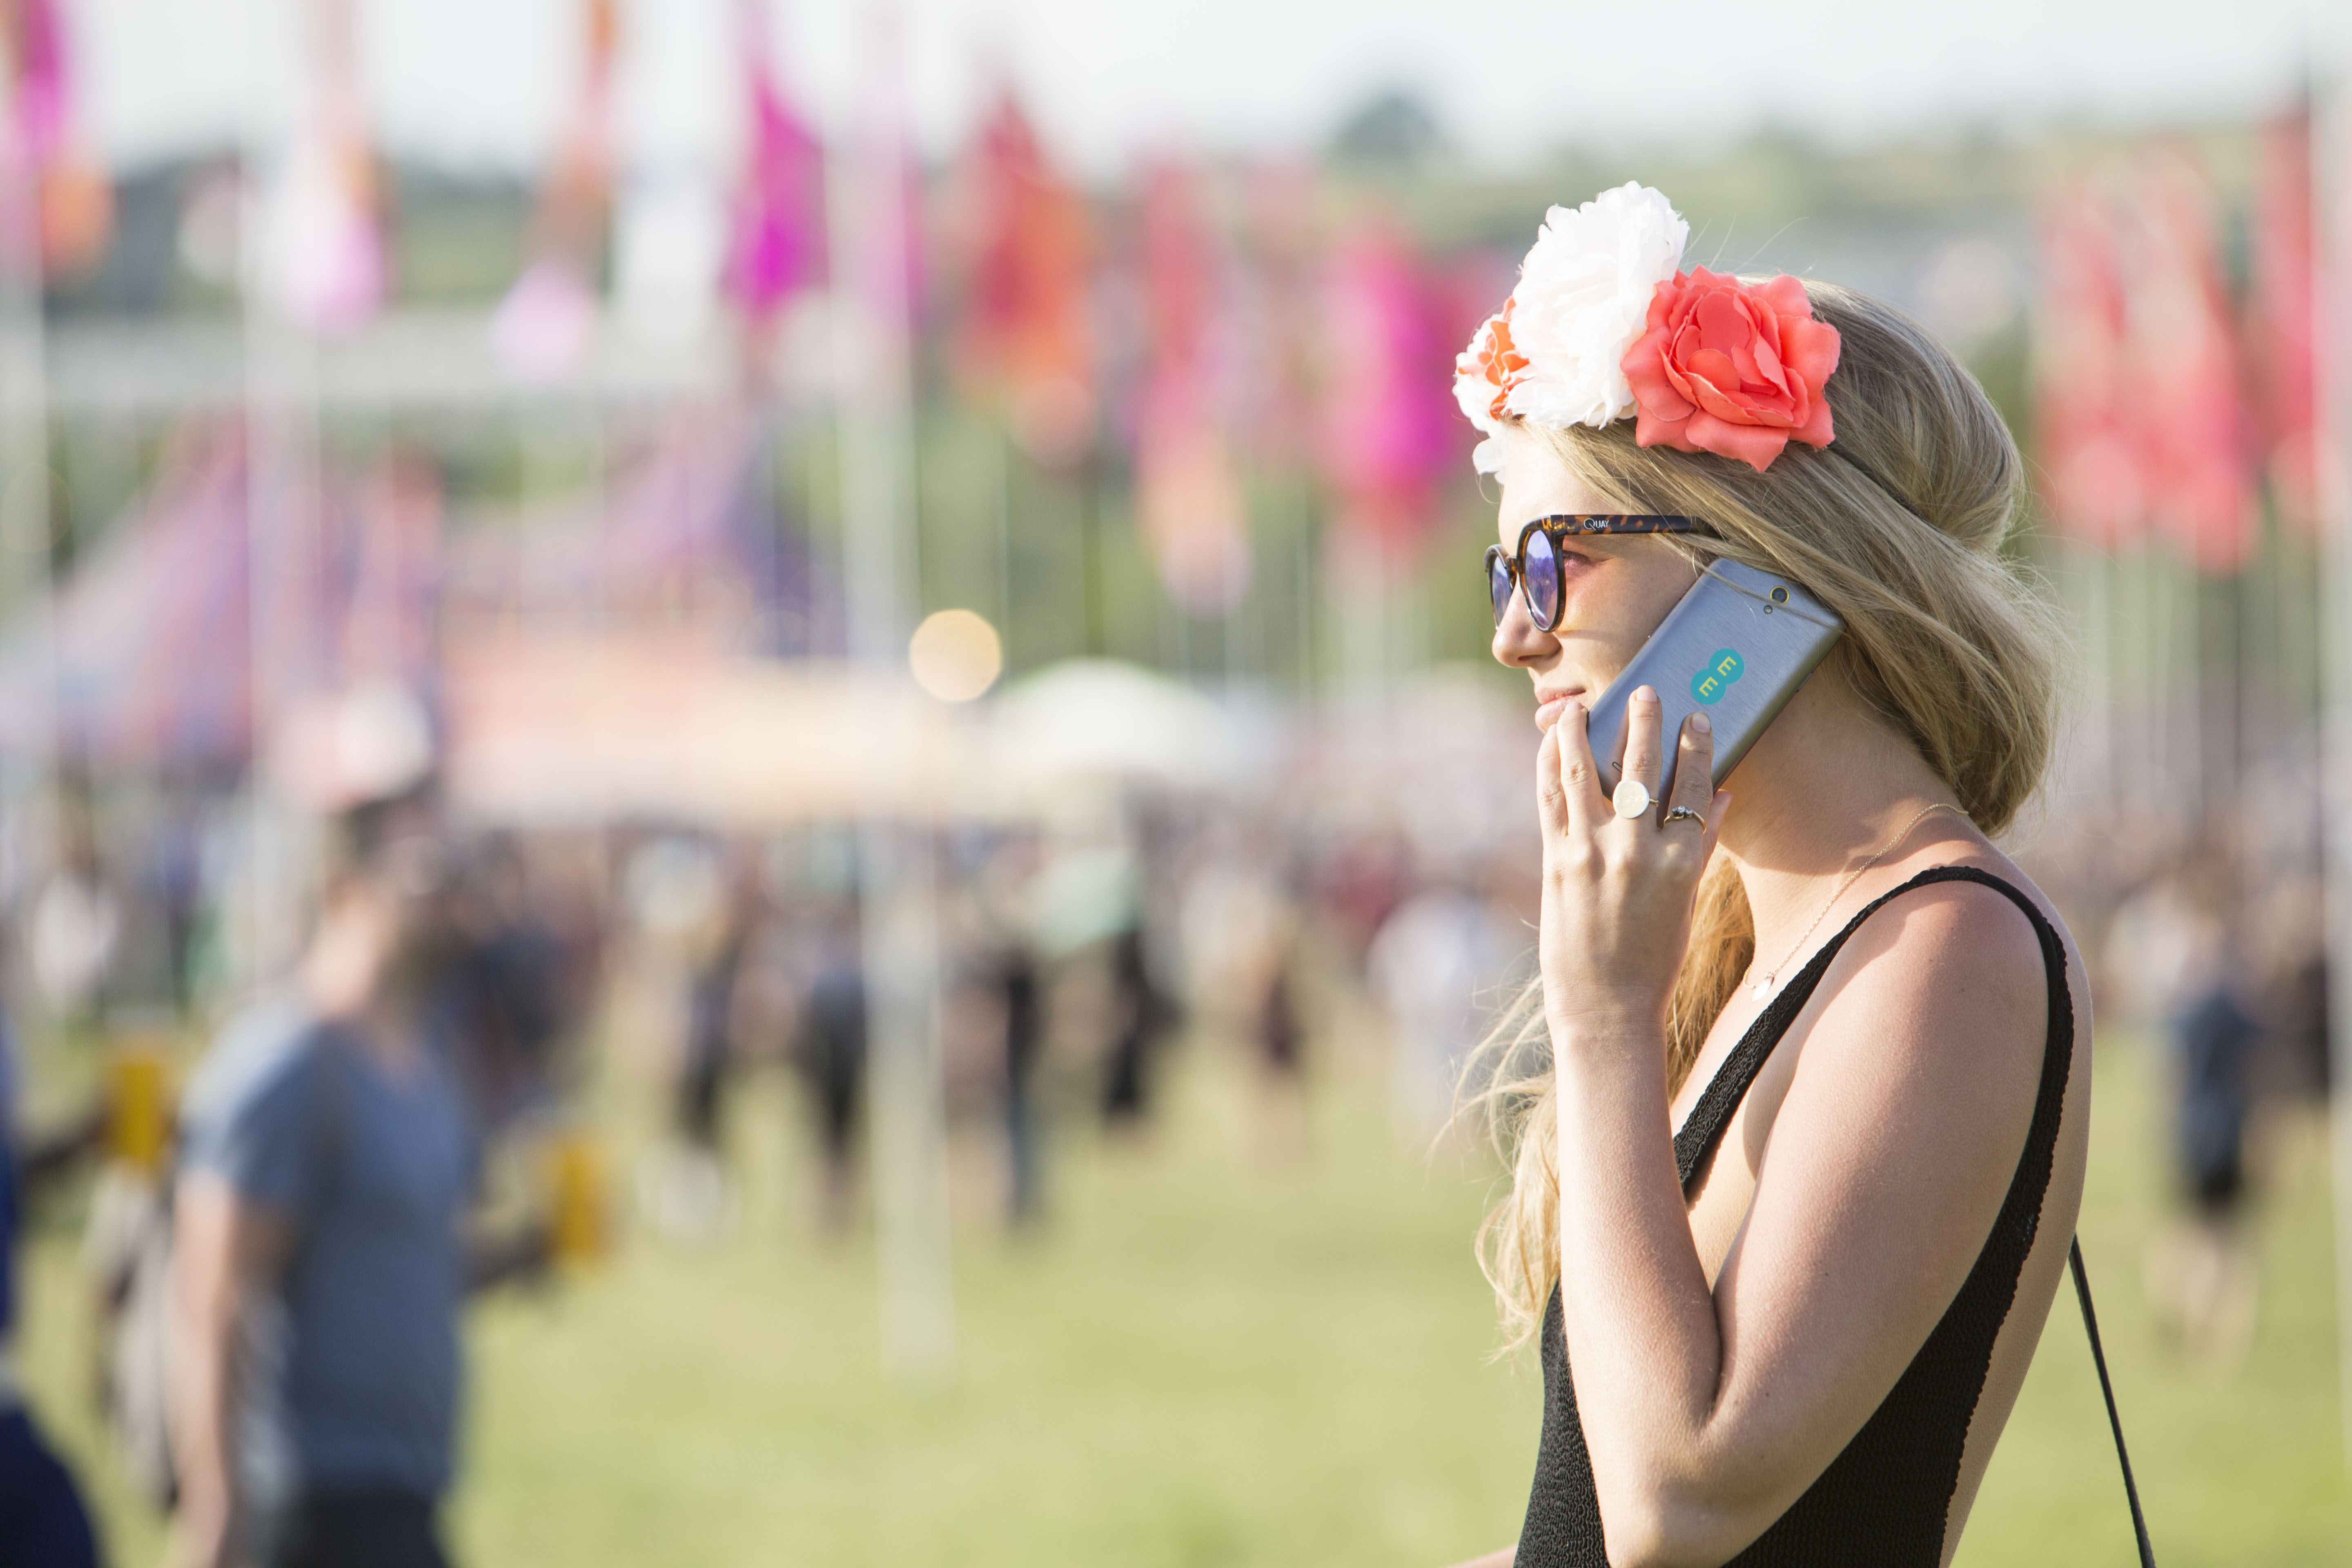 Glastonbury Attendees Will Use 15 Terabytes of Data This Year